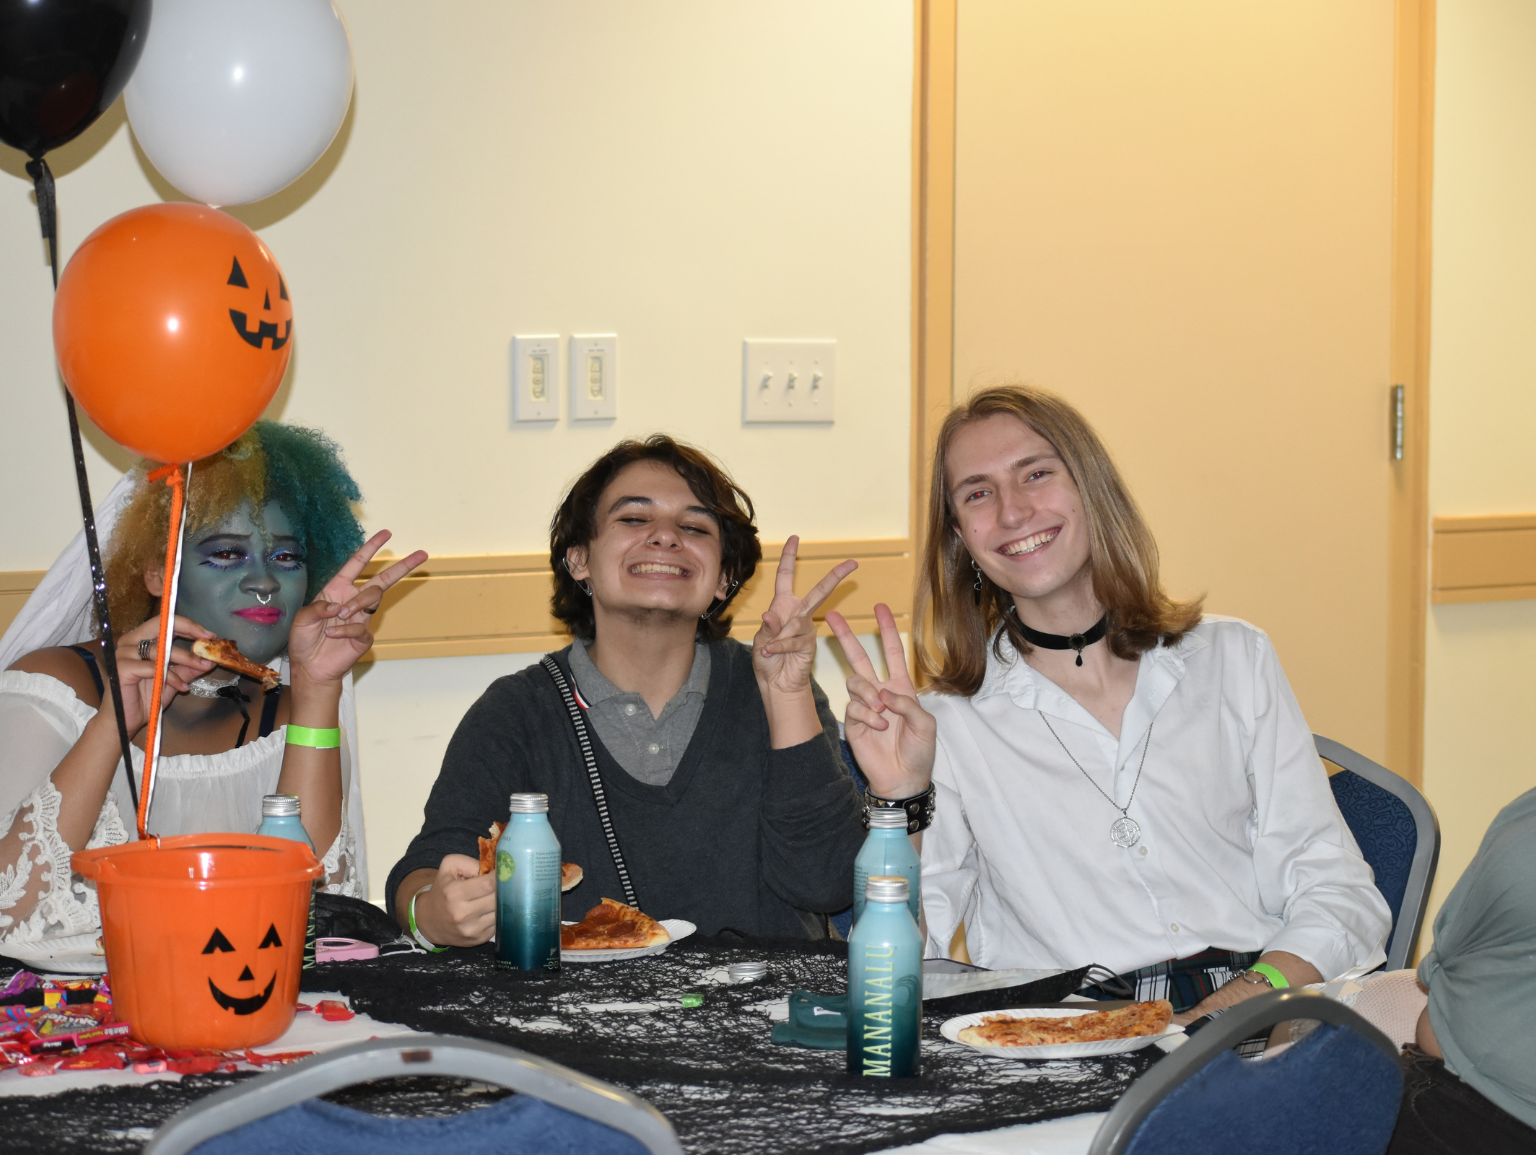 Costume-clad students enjoy pizza at the Boo Bash Halloween event in the University Student Center